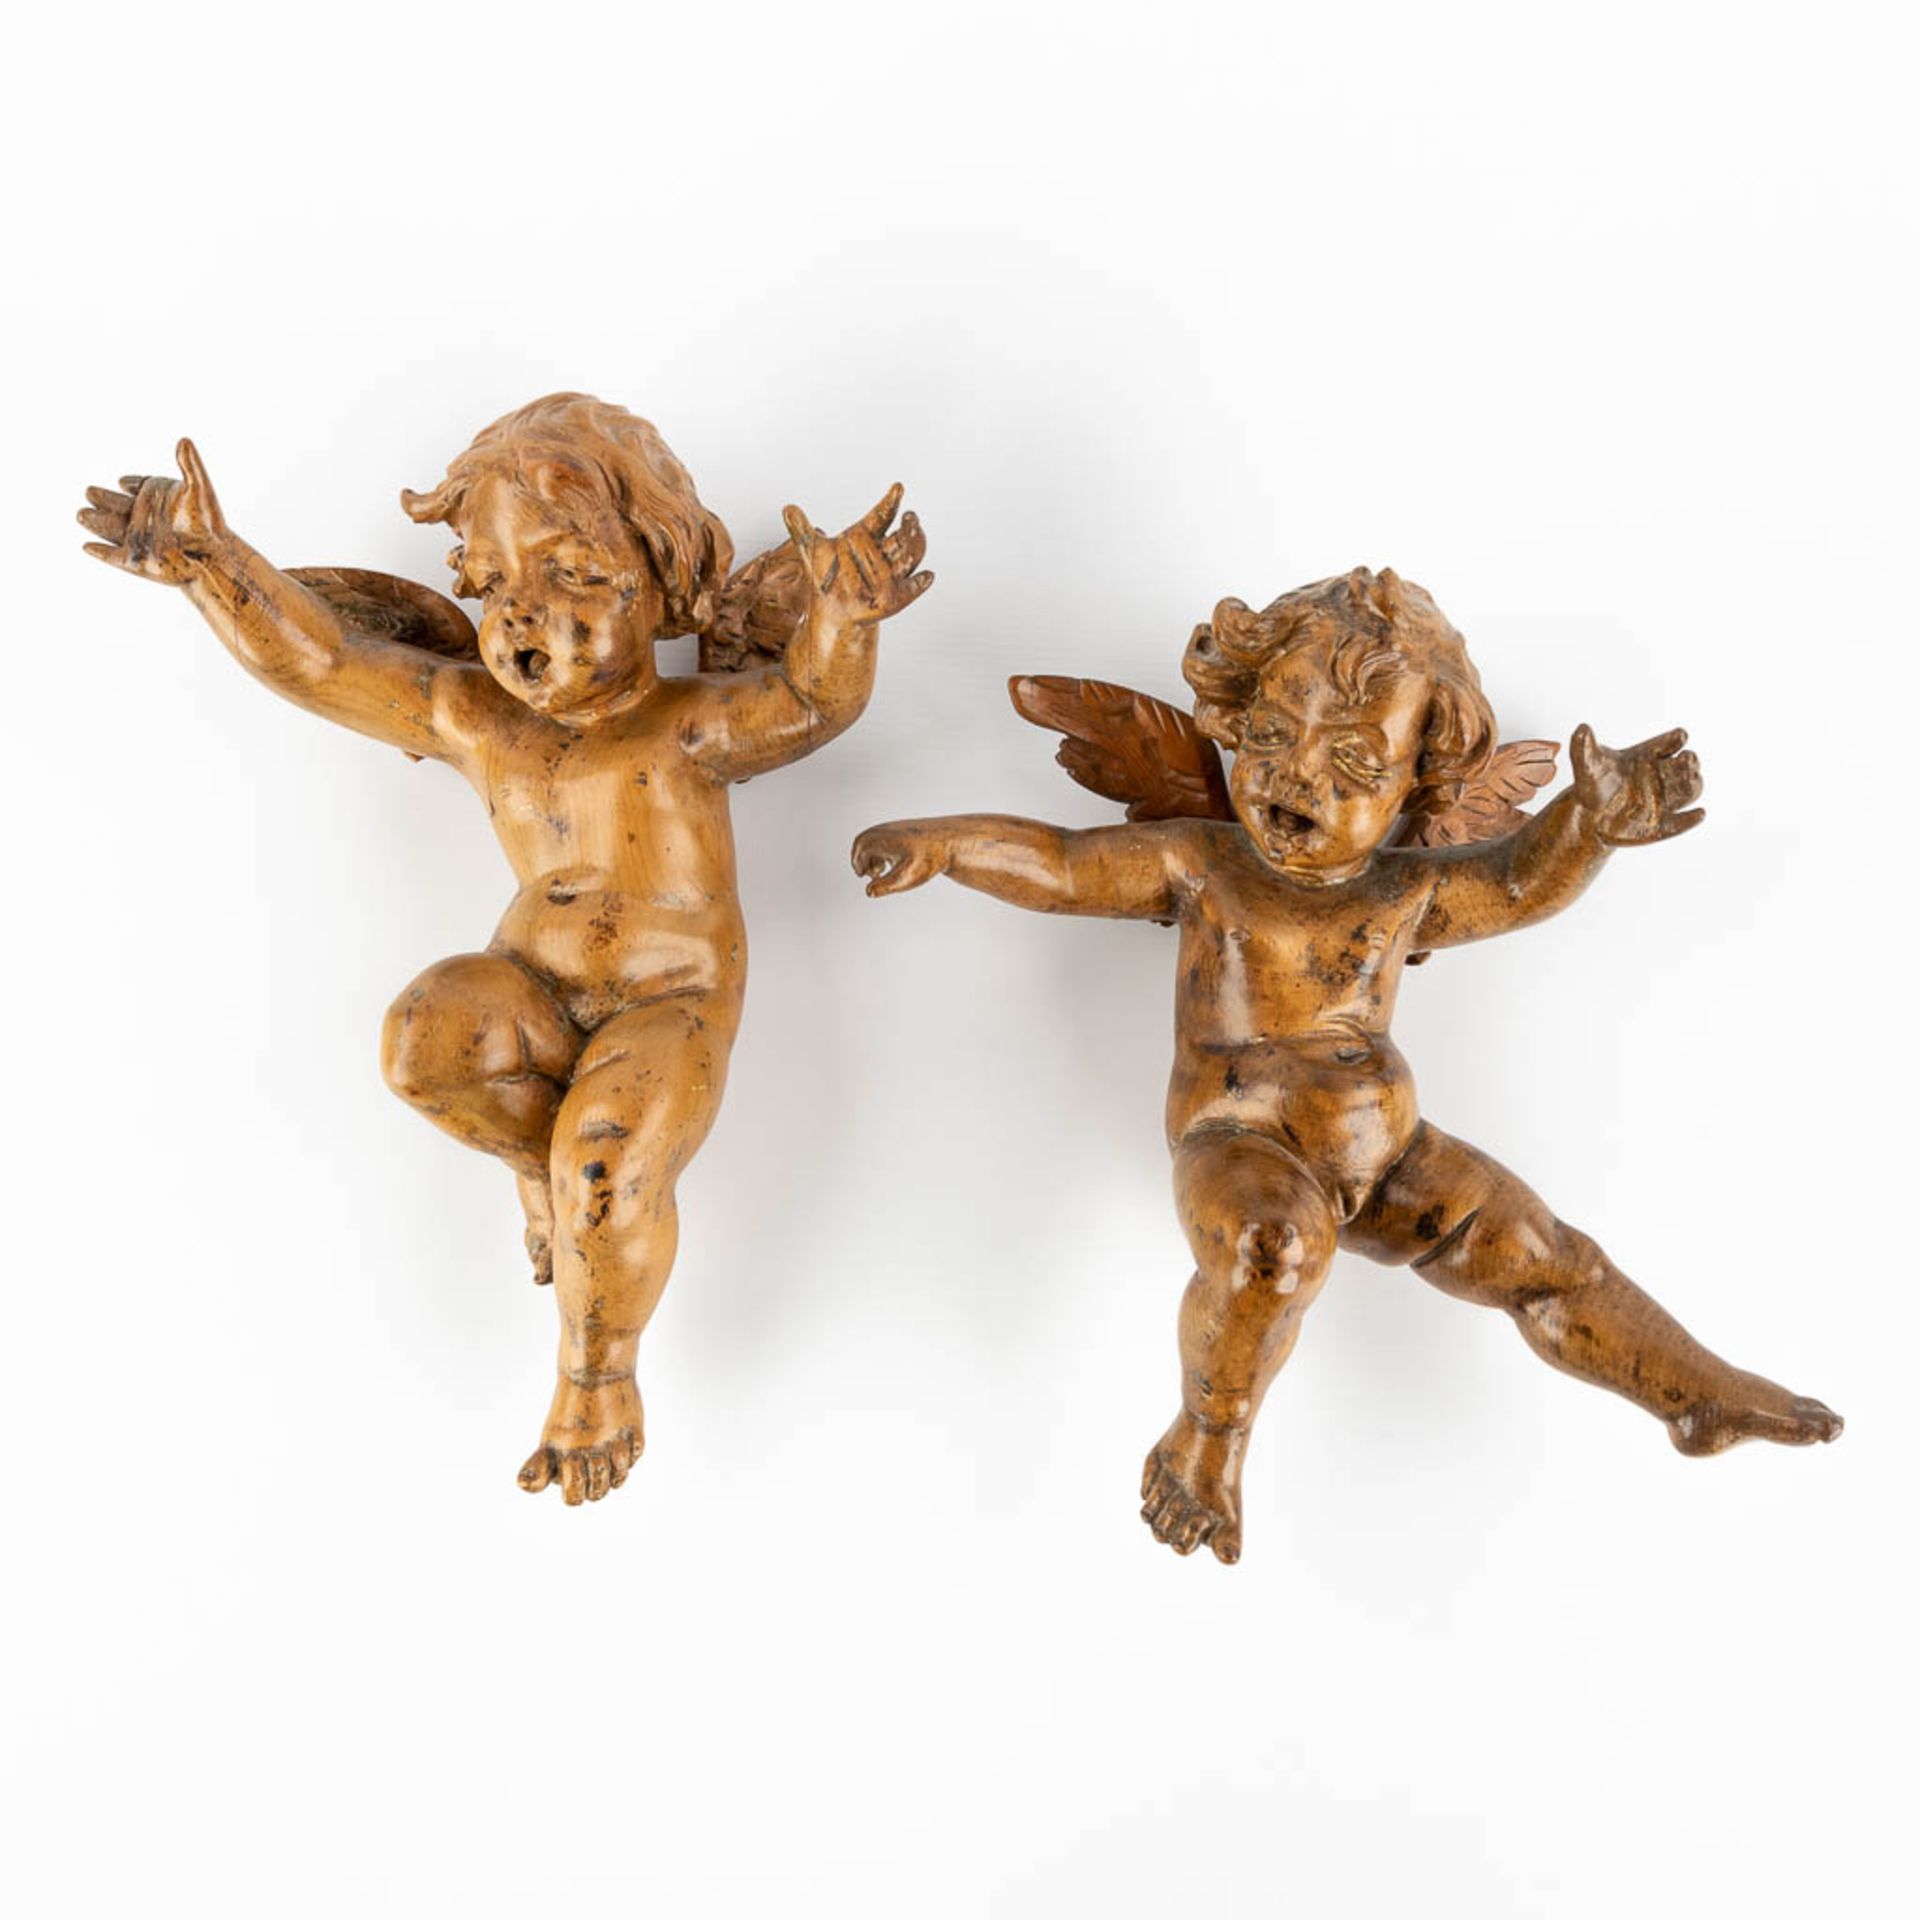 A pair of wood-sculptured putti, basswood, 18th C. (W:22 x H:30 cm)